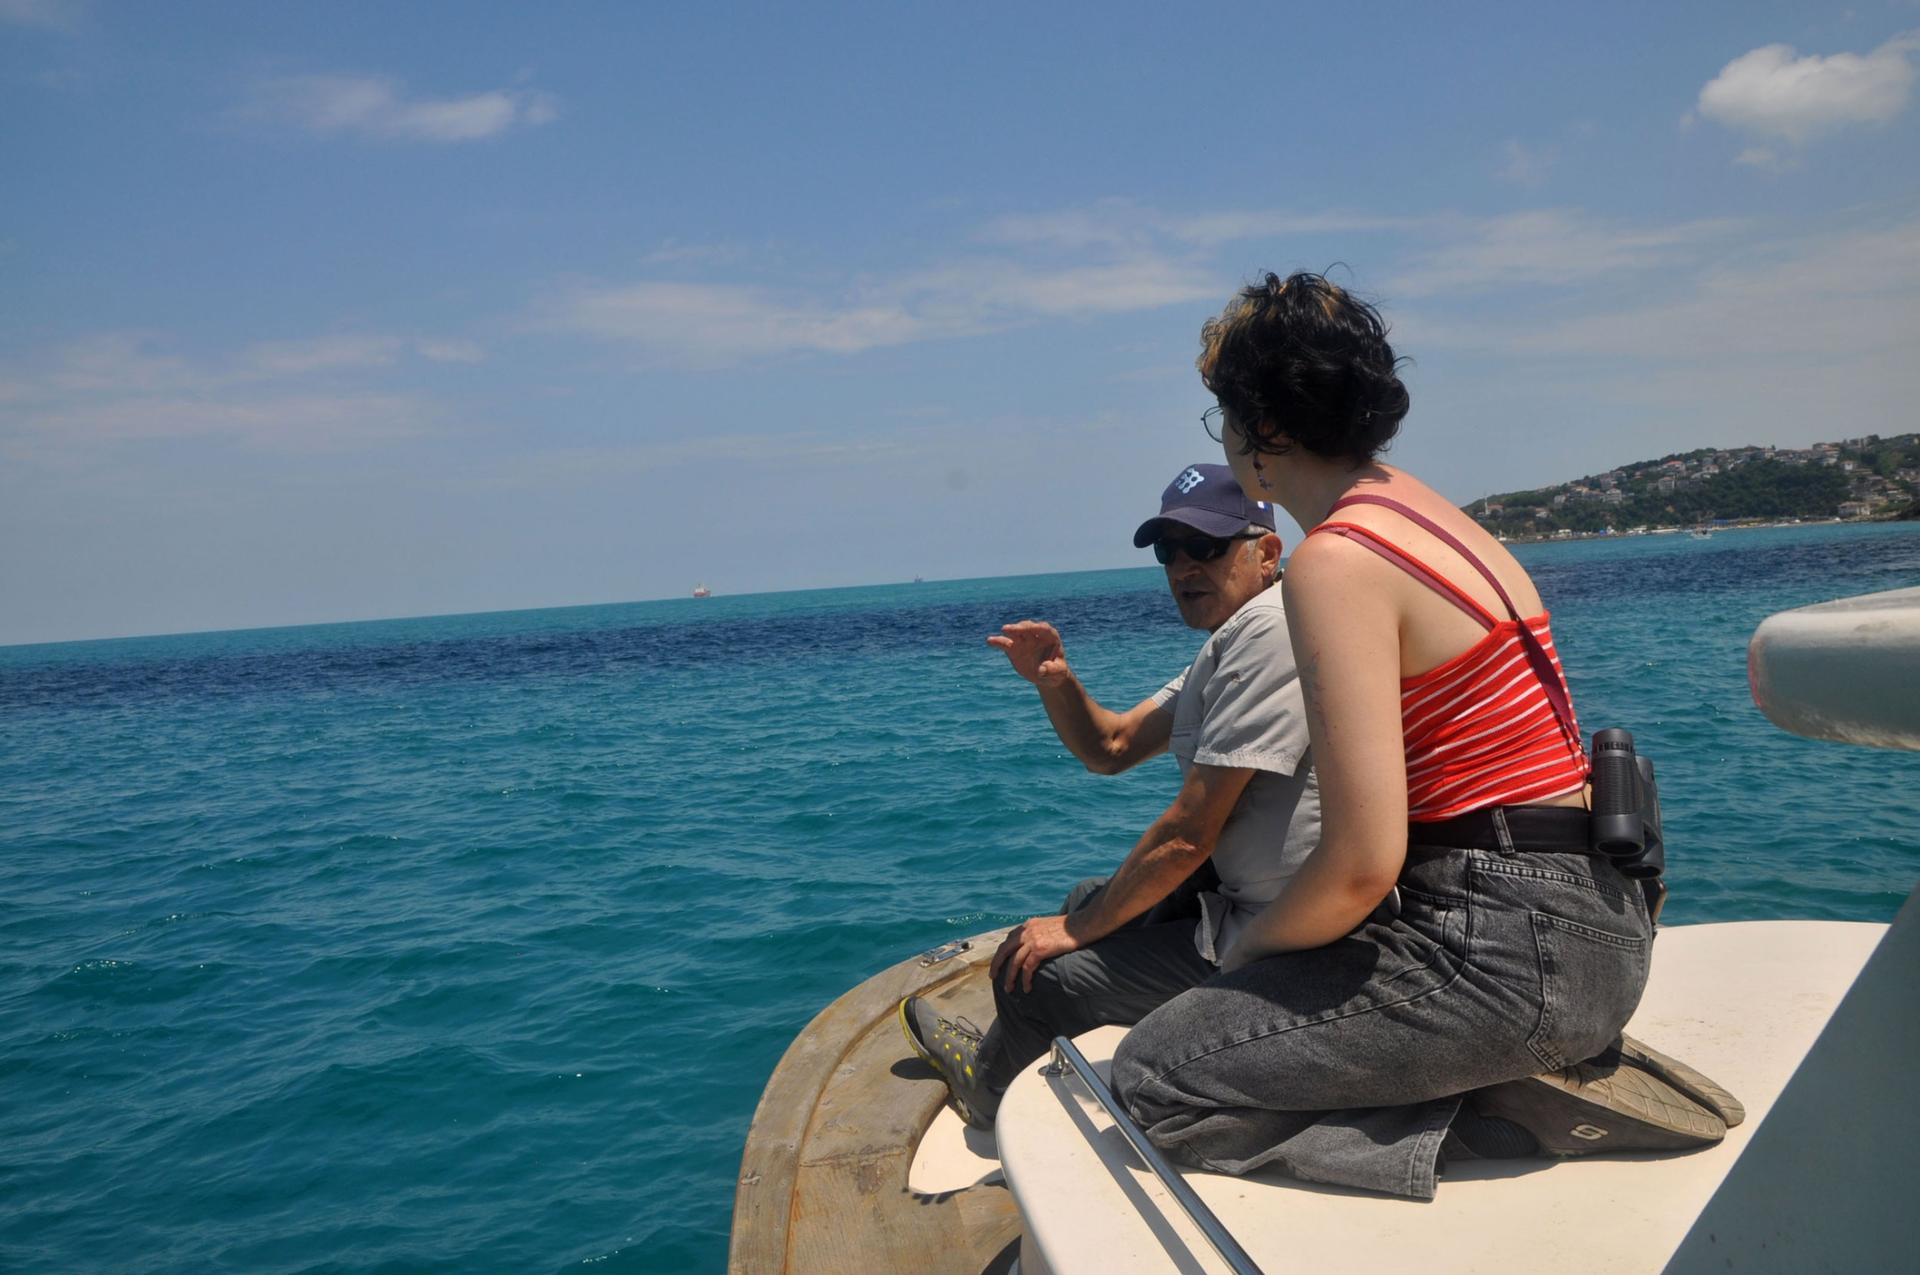 Marine biologist Ayhan Dede and doctoral student Aylin Güler keep an eye out for dolphins on a survey trip in the Bosphorus Strait.